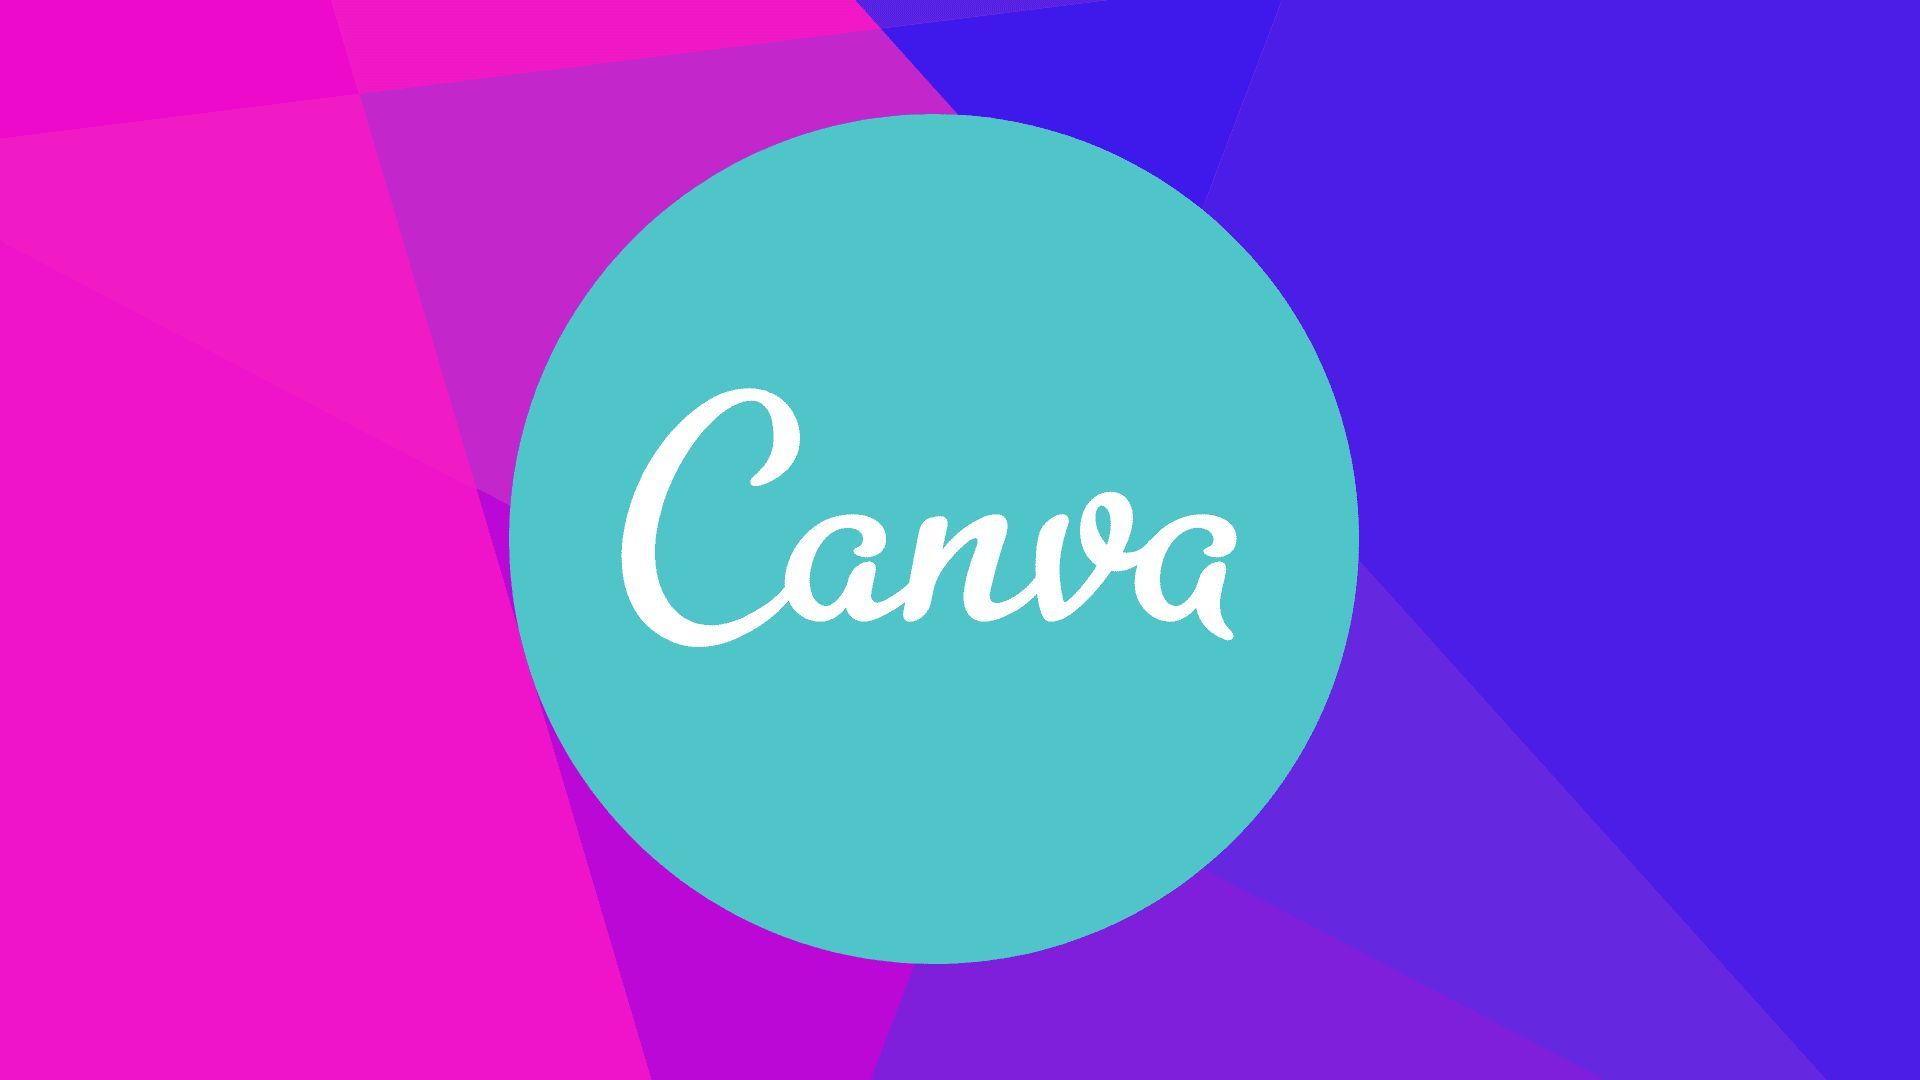 How to use Canva Beat Sync?